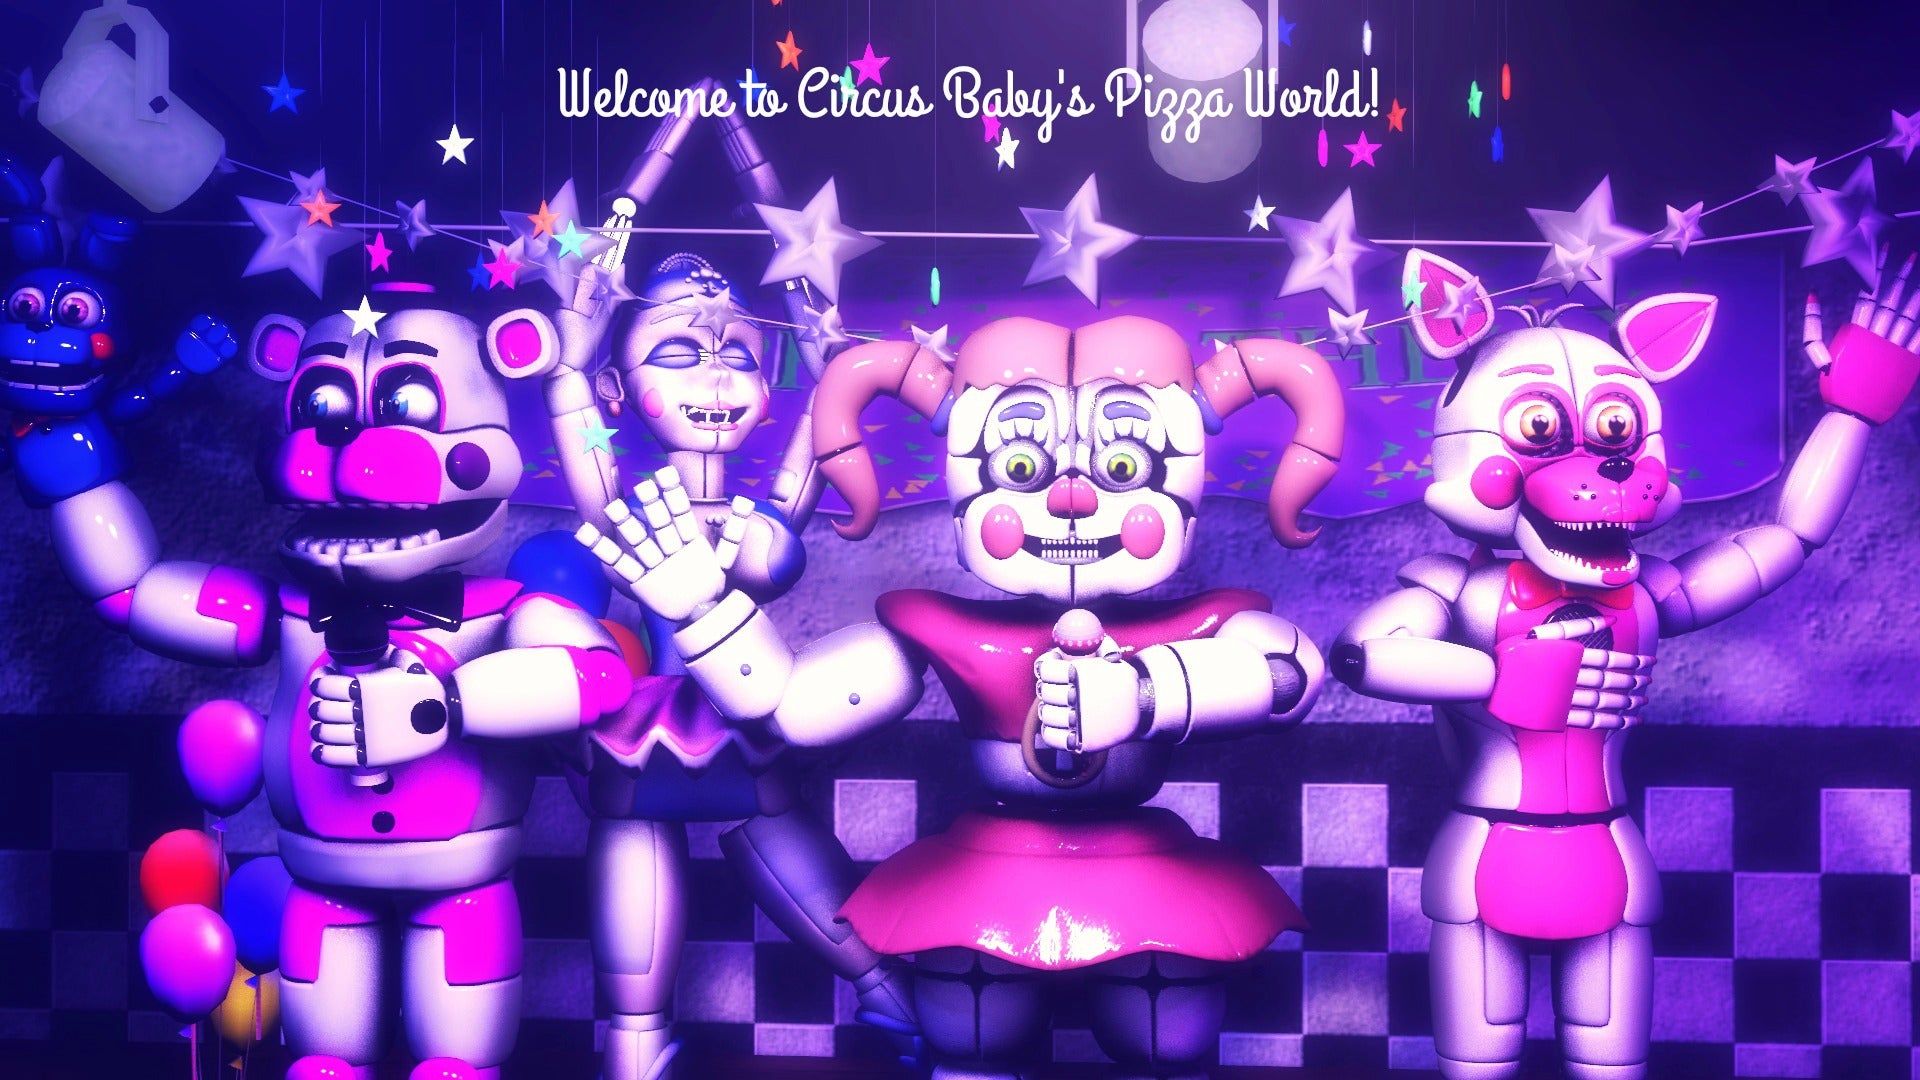 Circus Baby Pizza World Wallpapers Wallpaper Cave